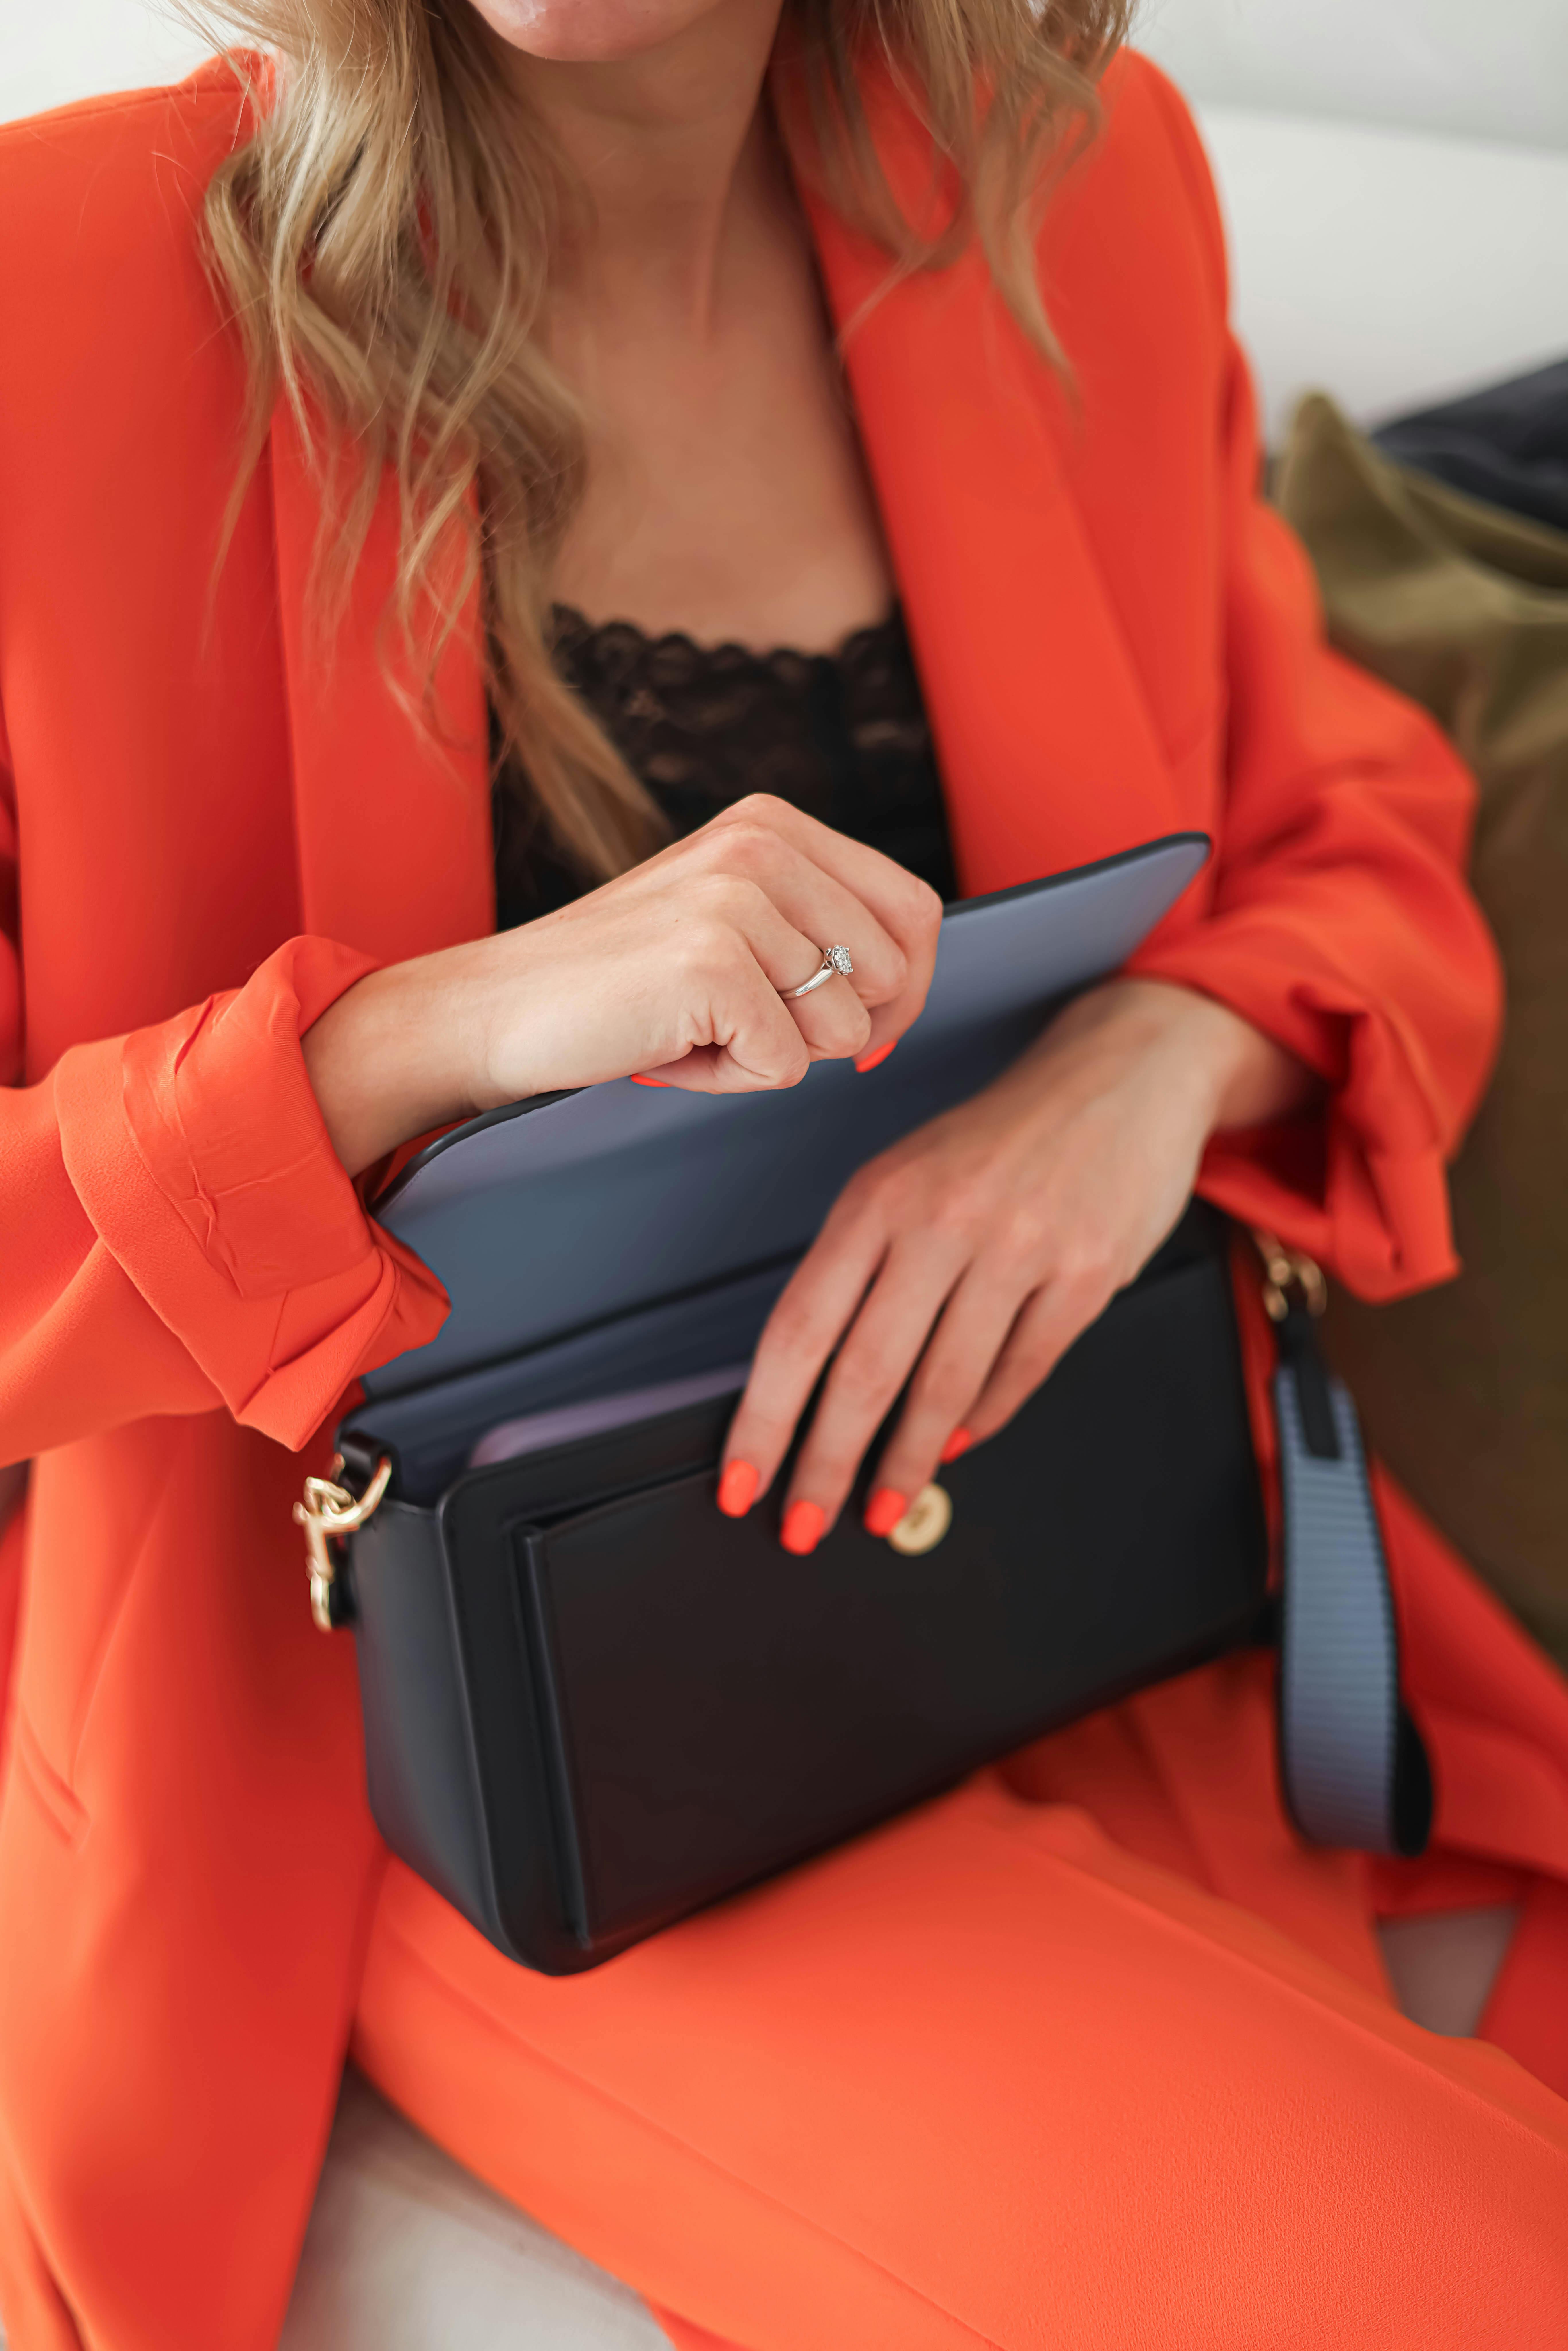 Woman bringing out a wallet from her bag | Source: Pexels